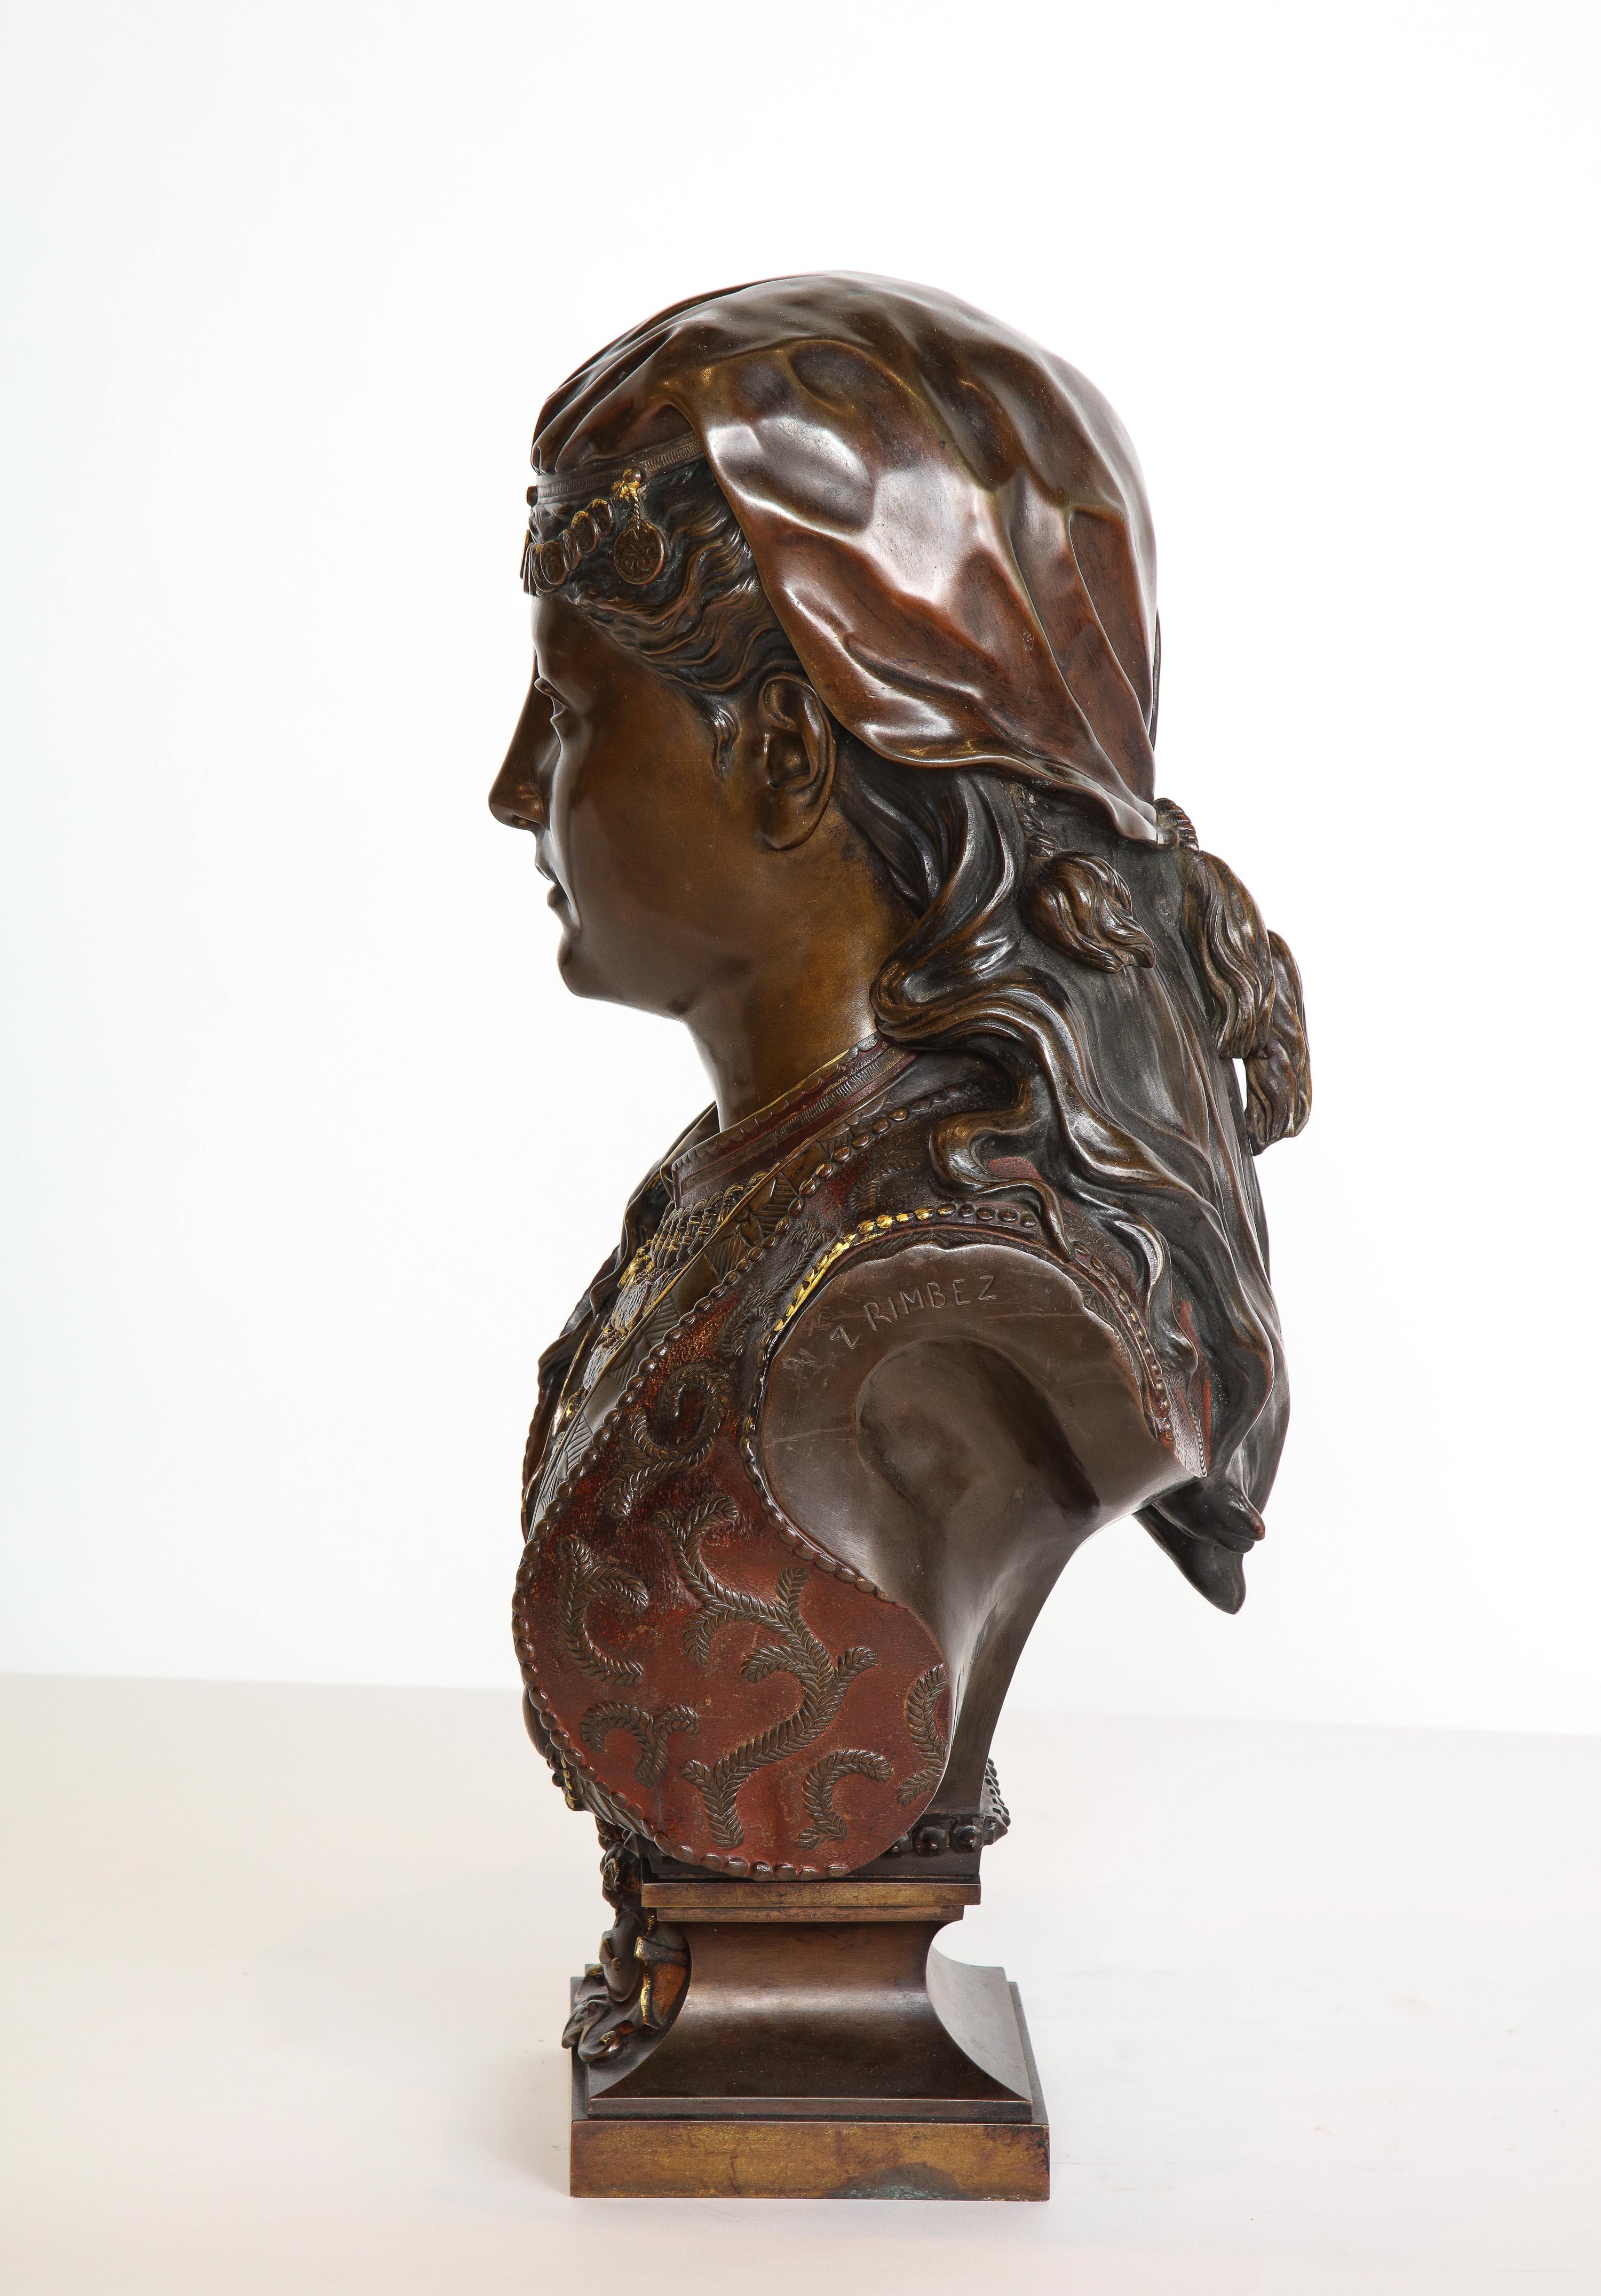 An Exquisite French Multi-Patinated Orientalist Bronze Bust of A Turkish Beauty, by Zacharie Rimbez, late 19th century.

Signed 'Z. Rimbez' (on the left shoulder)

Please check our other listings for another bust by Rimbez (could be a pair).

22